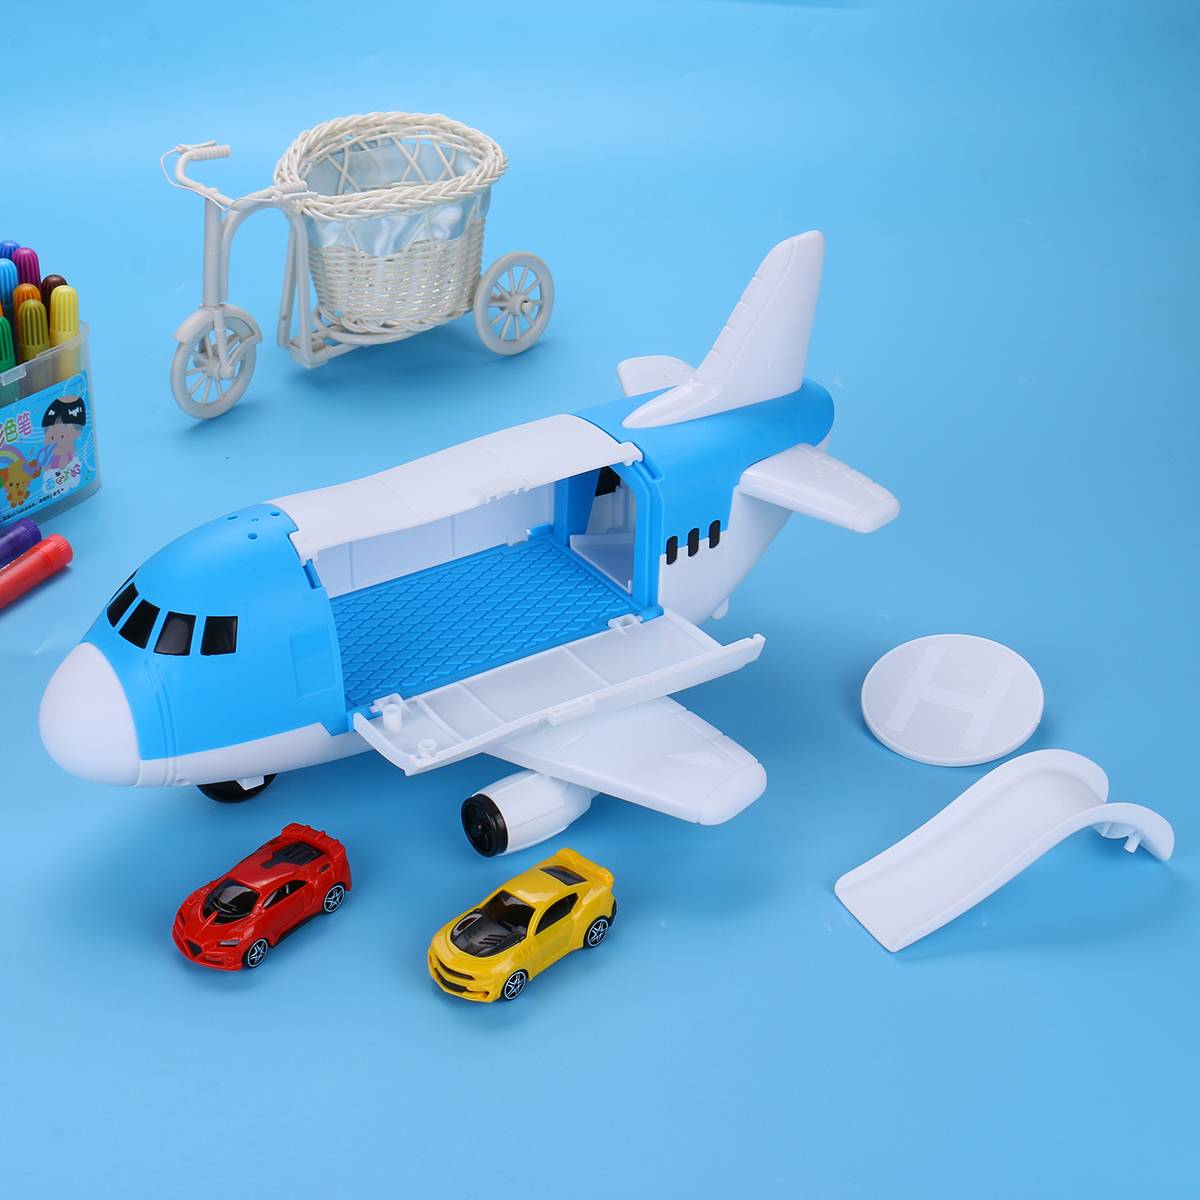 Storage-Transport-Aircraft-Model-Inertia-Diecast-Model-Car-Set-Toy-for-Childrens-Gift-1621631-6